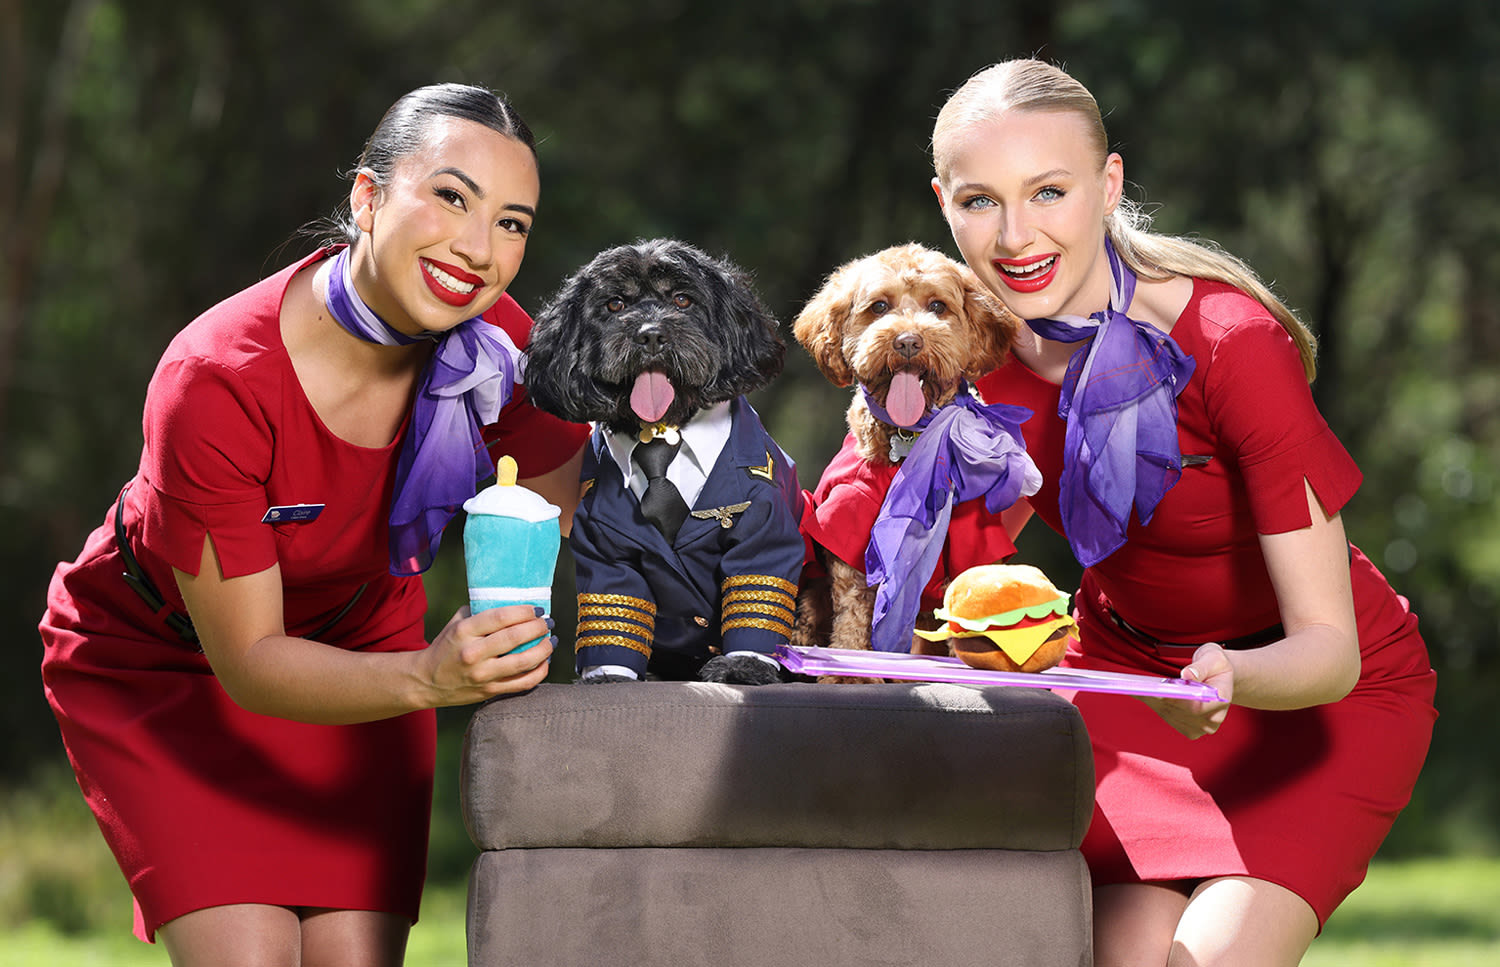 Two Virgin Australia cabin crew members pose for a photo with two dogs dressed as a Virgin Australia pilot and Virgin Australia cabin crew